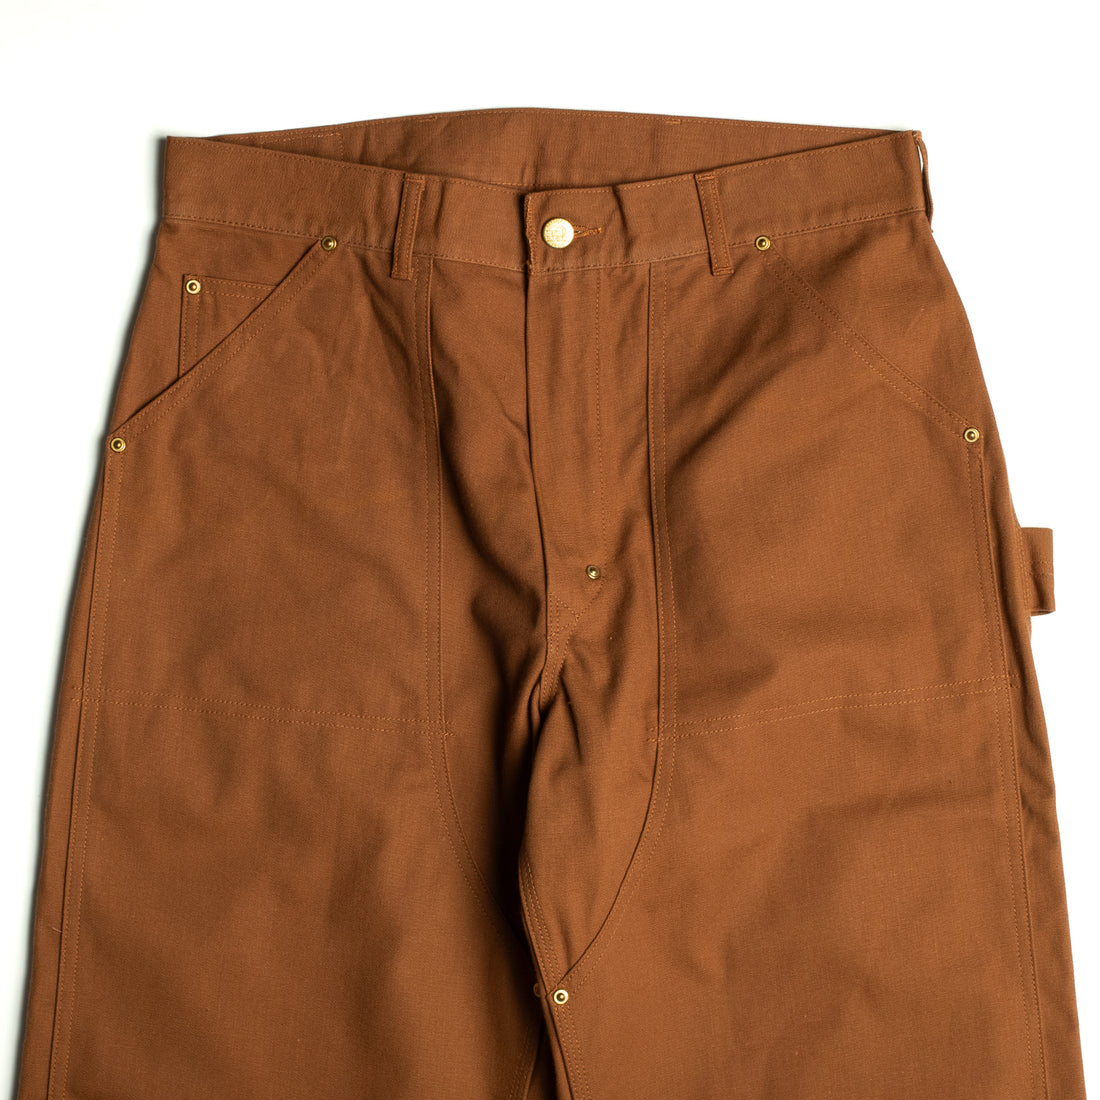 Bryceland’s Double Knee Pant Duck Cotton